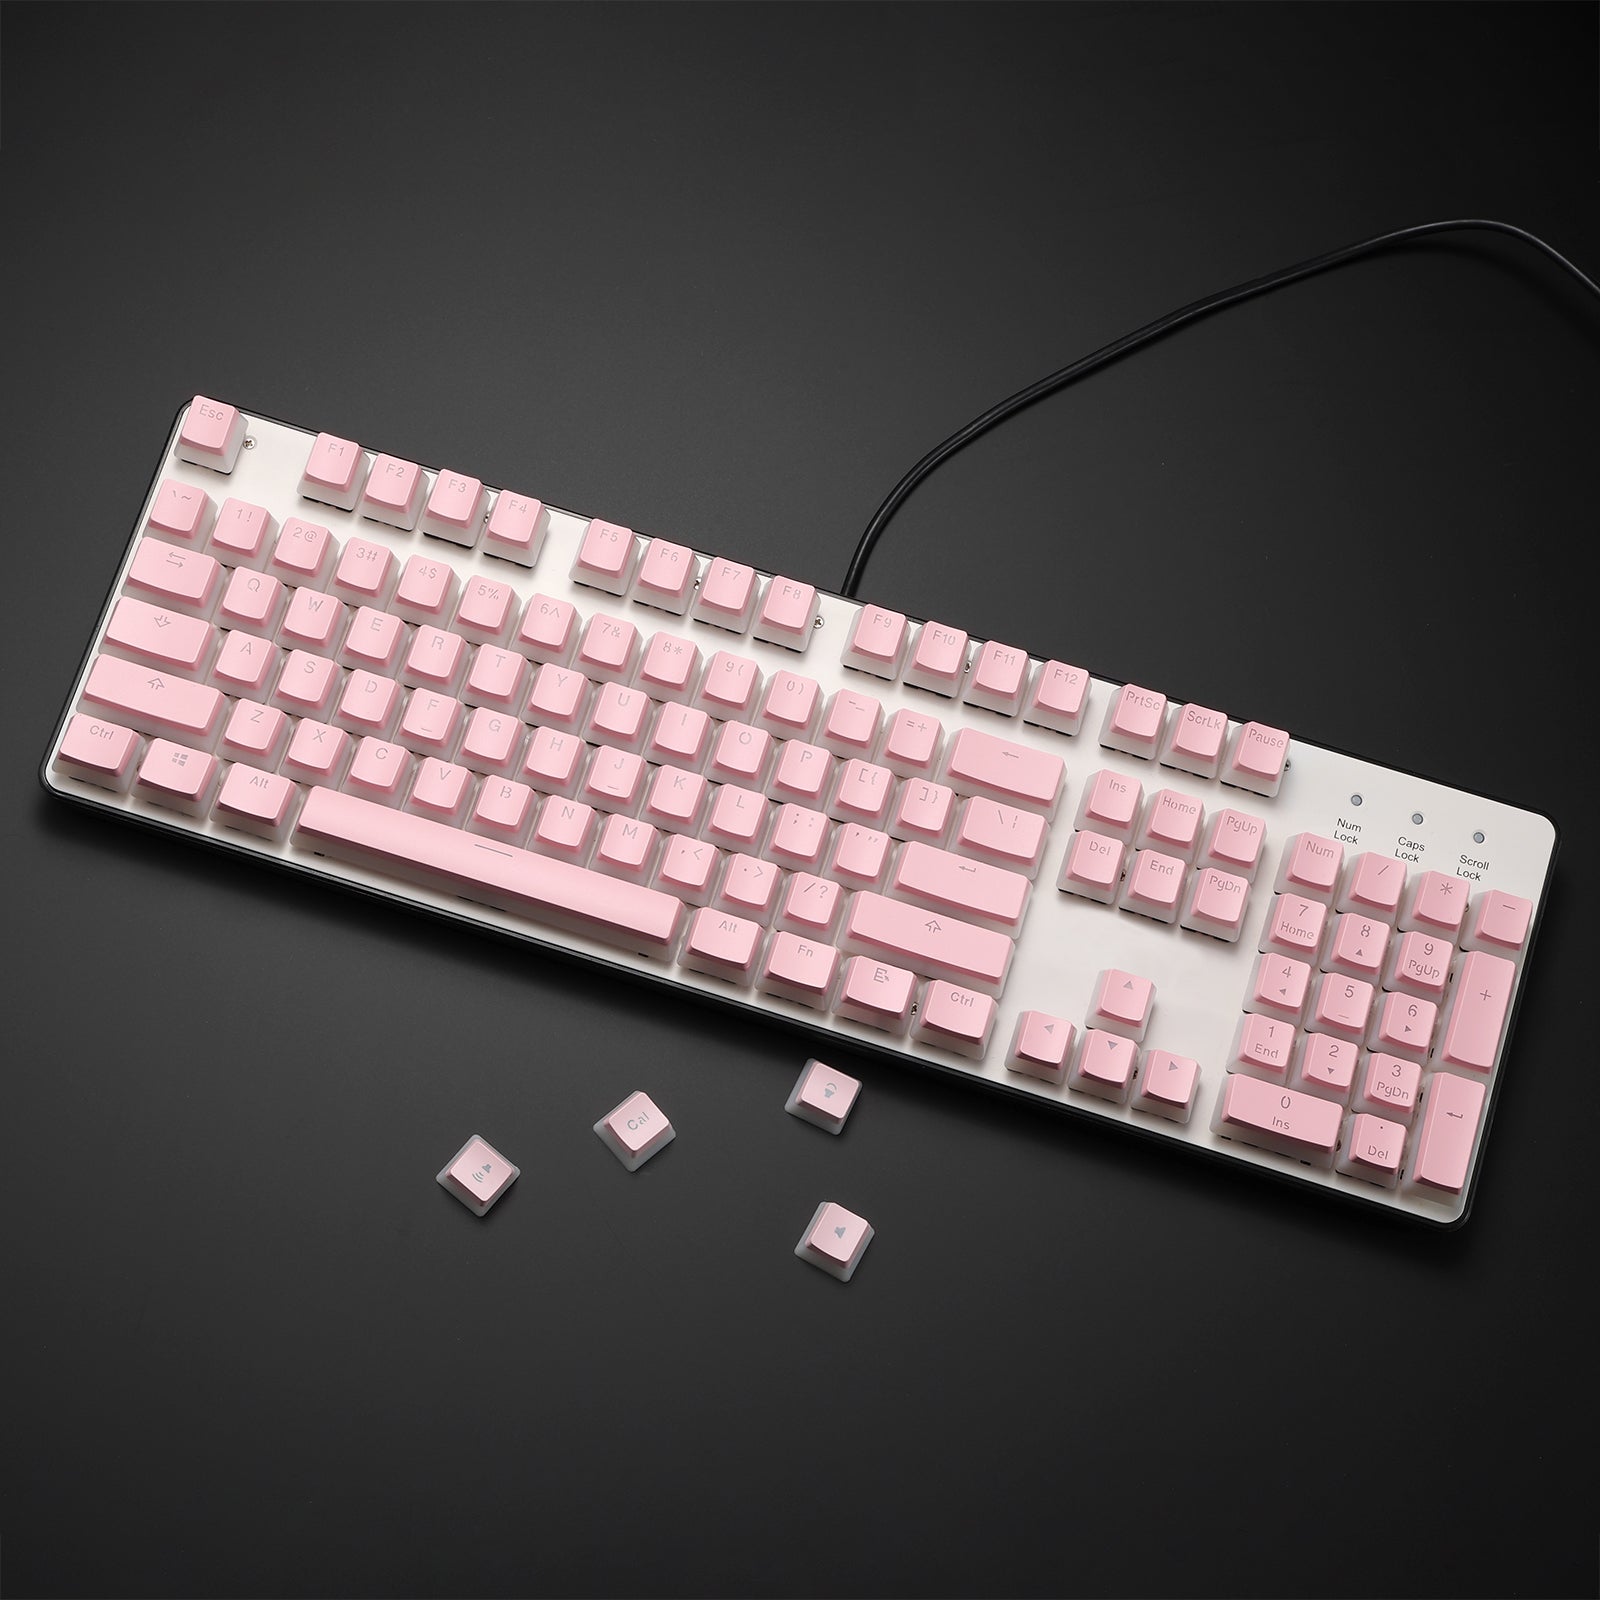 PBT Double Shot 108 Pudding Keycaps Set for mechanical keyboard